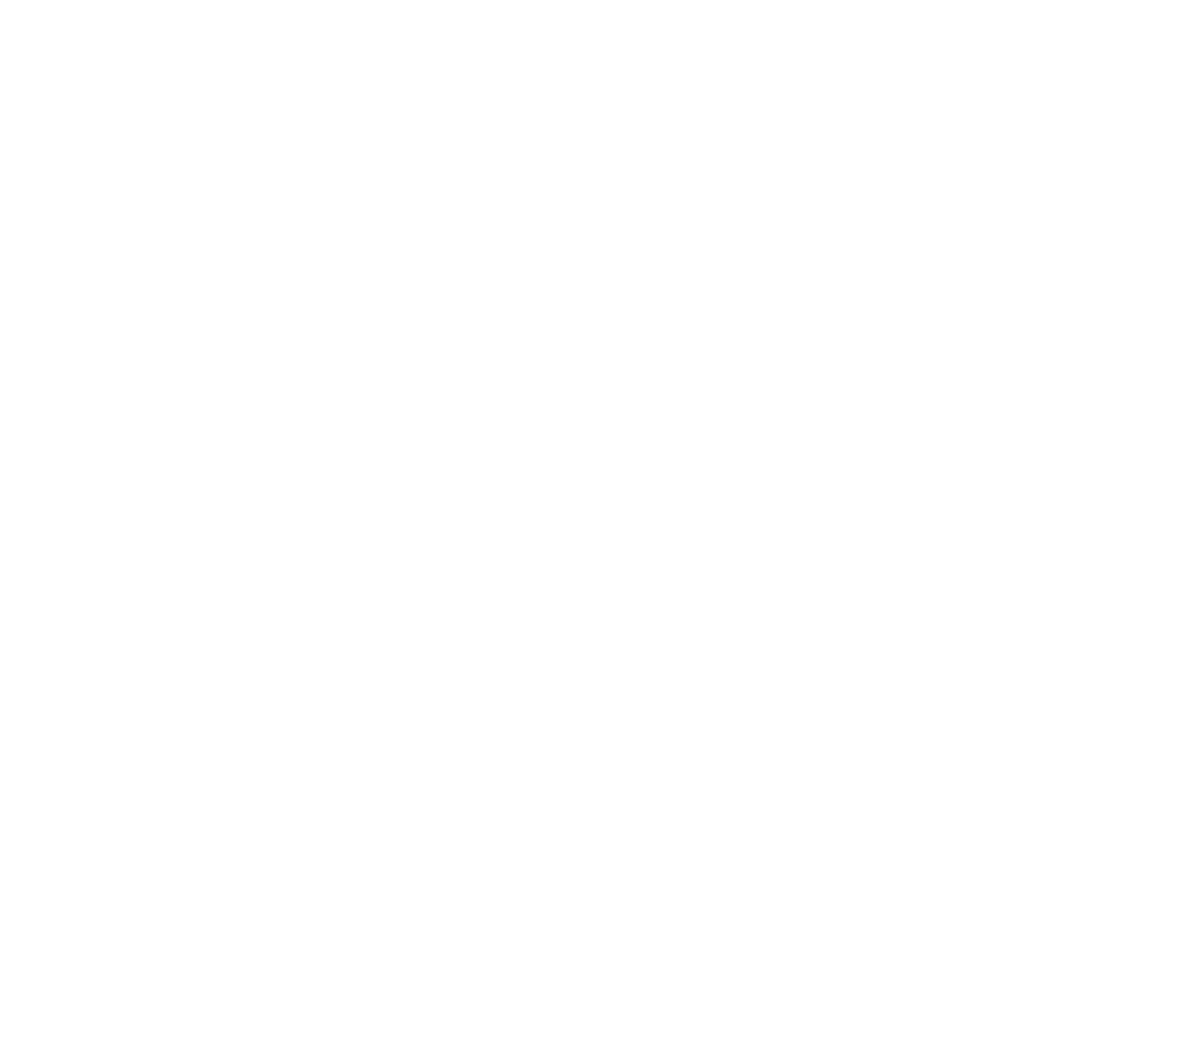 OUTtv